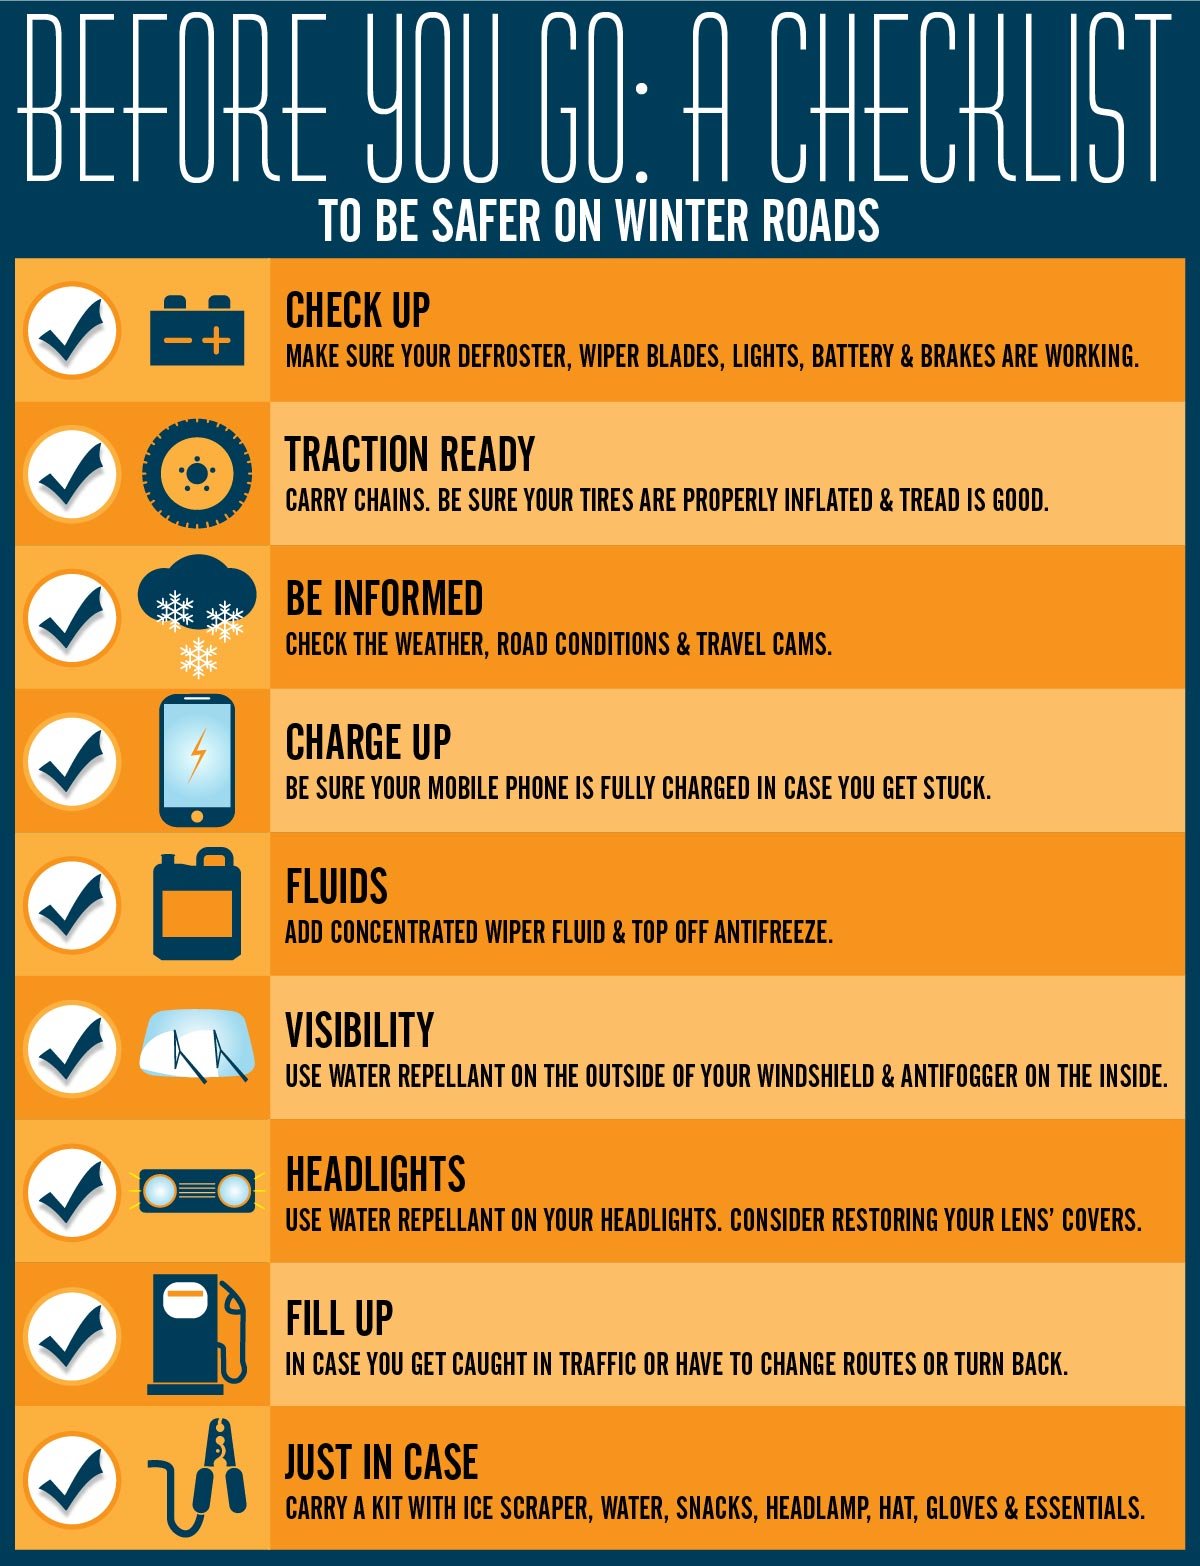 How to: Put on Snow Chains and Drive Safely - Les Schwab